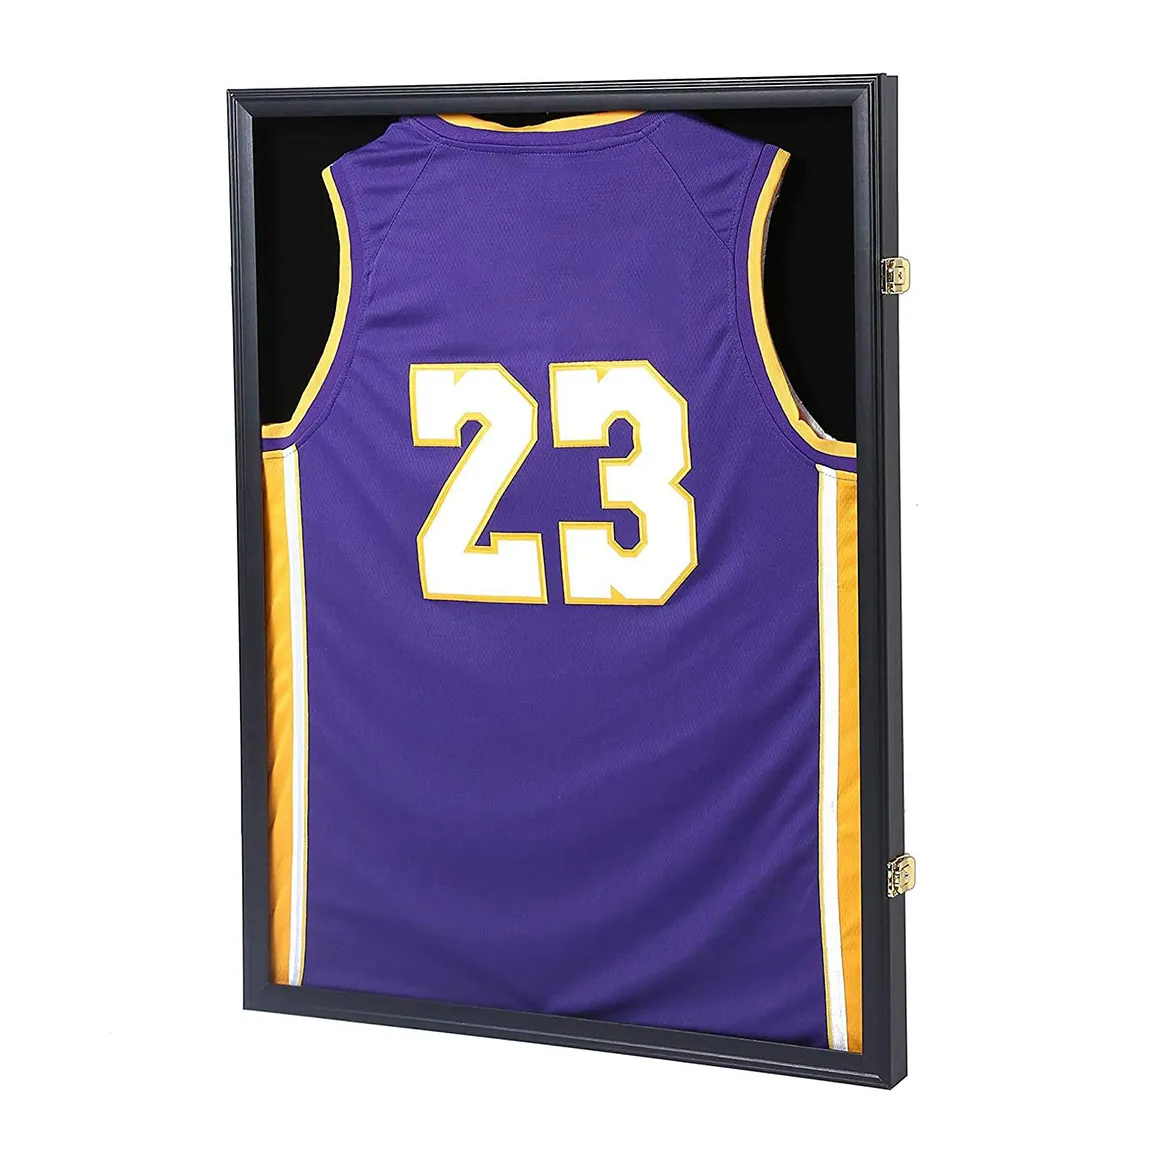 New Classic Custom Wood Jersey Frame Display Case Large Lockable Shadow Box Sports Jersey Frame